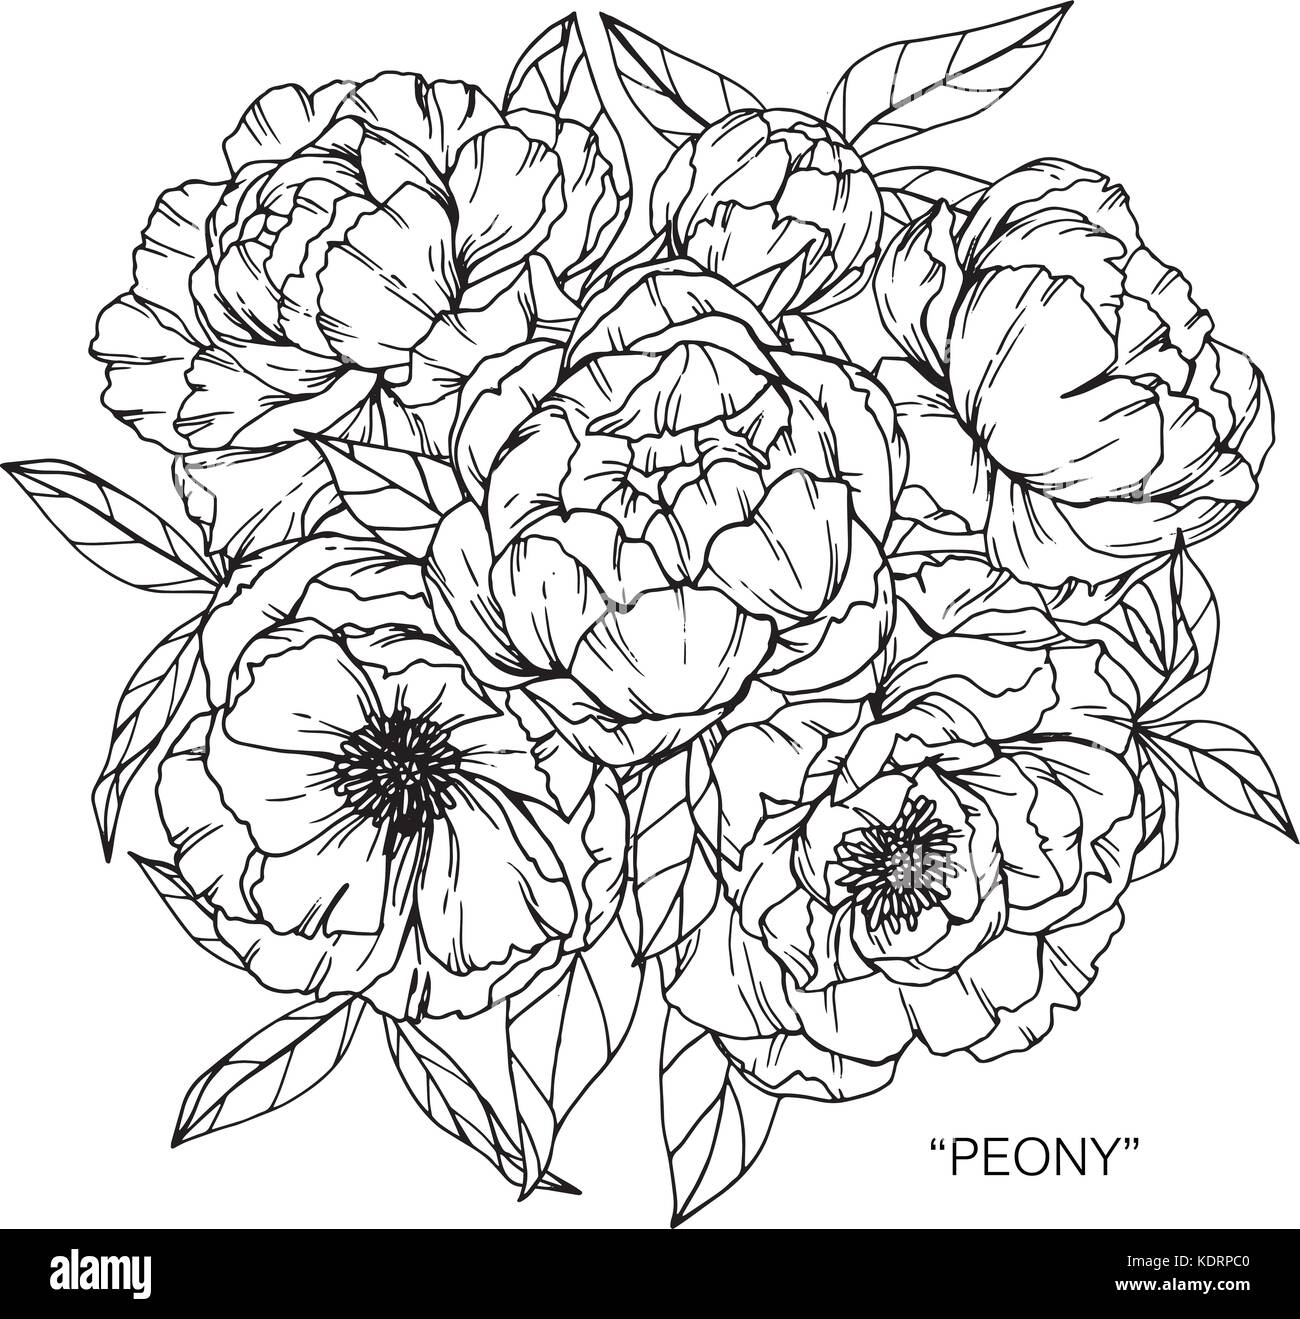 Bouquet of peony flowers drawing. Stock Vector